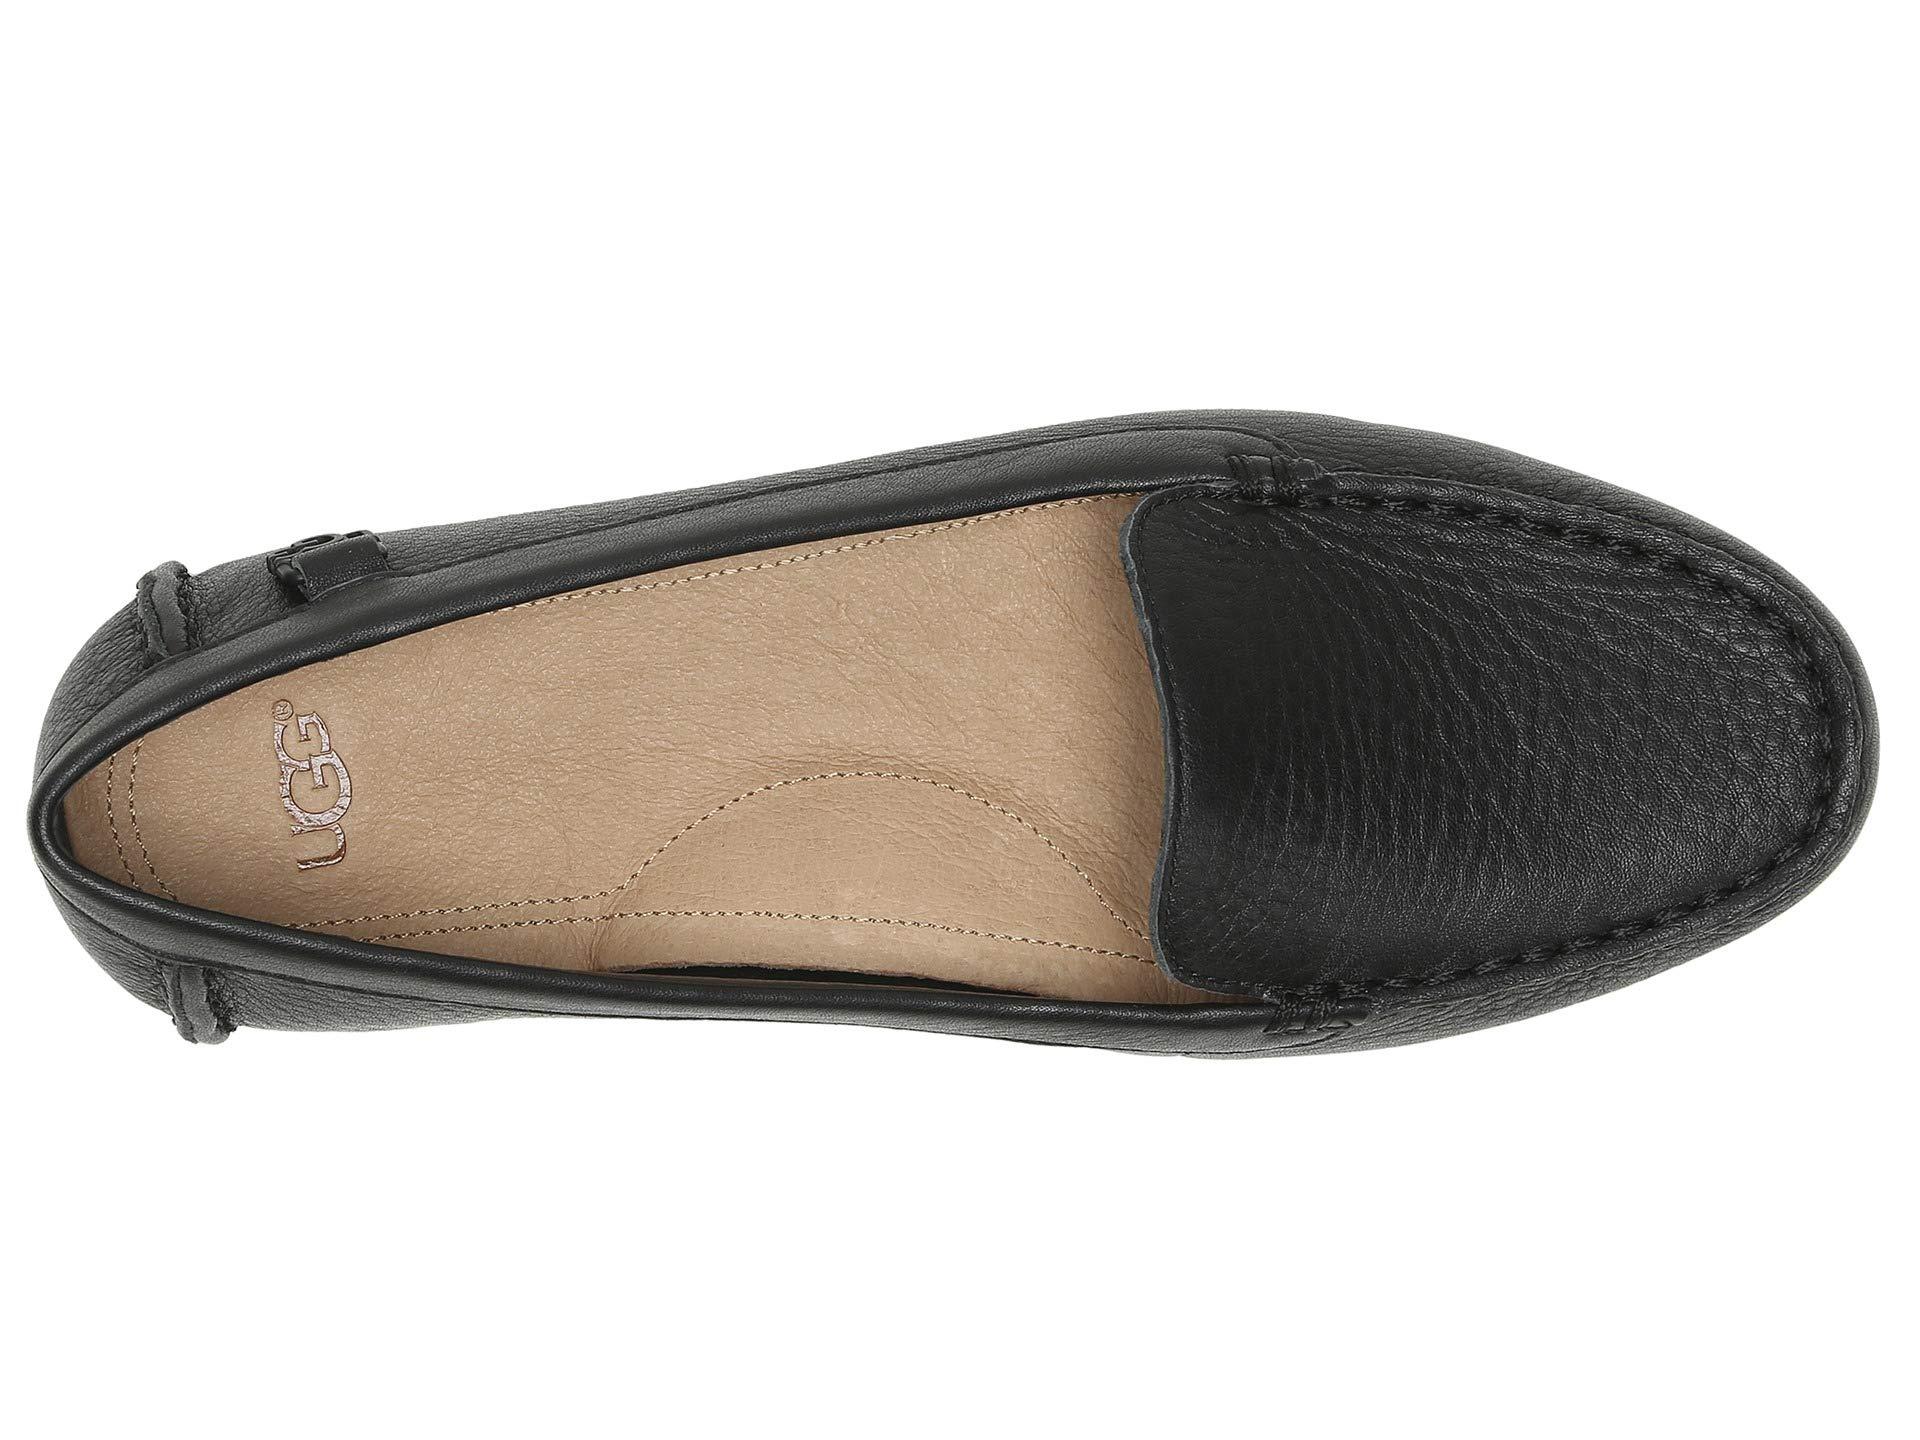 ugg flores leather flat